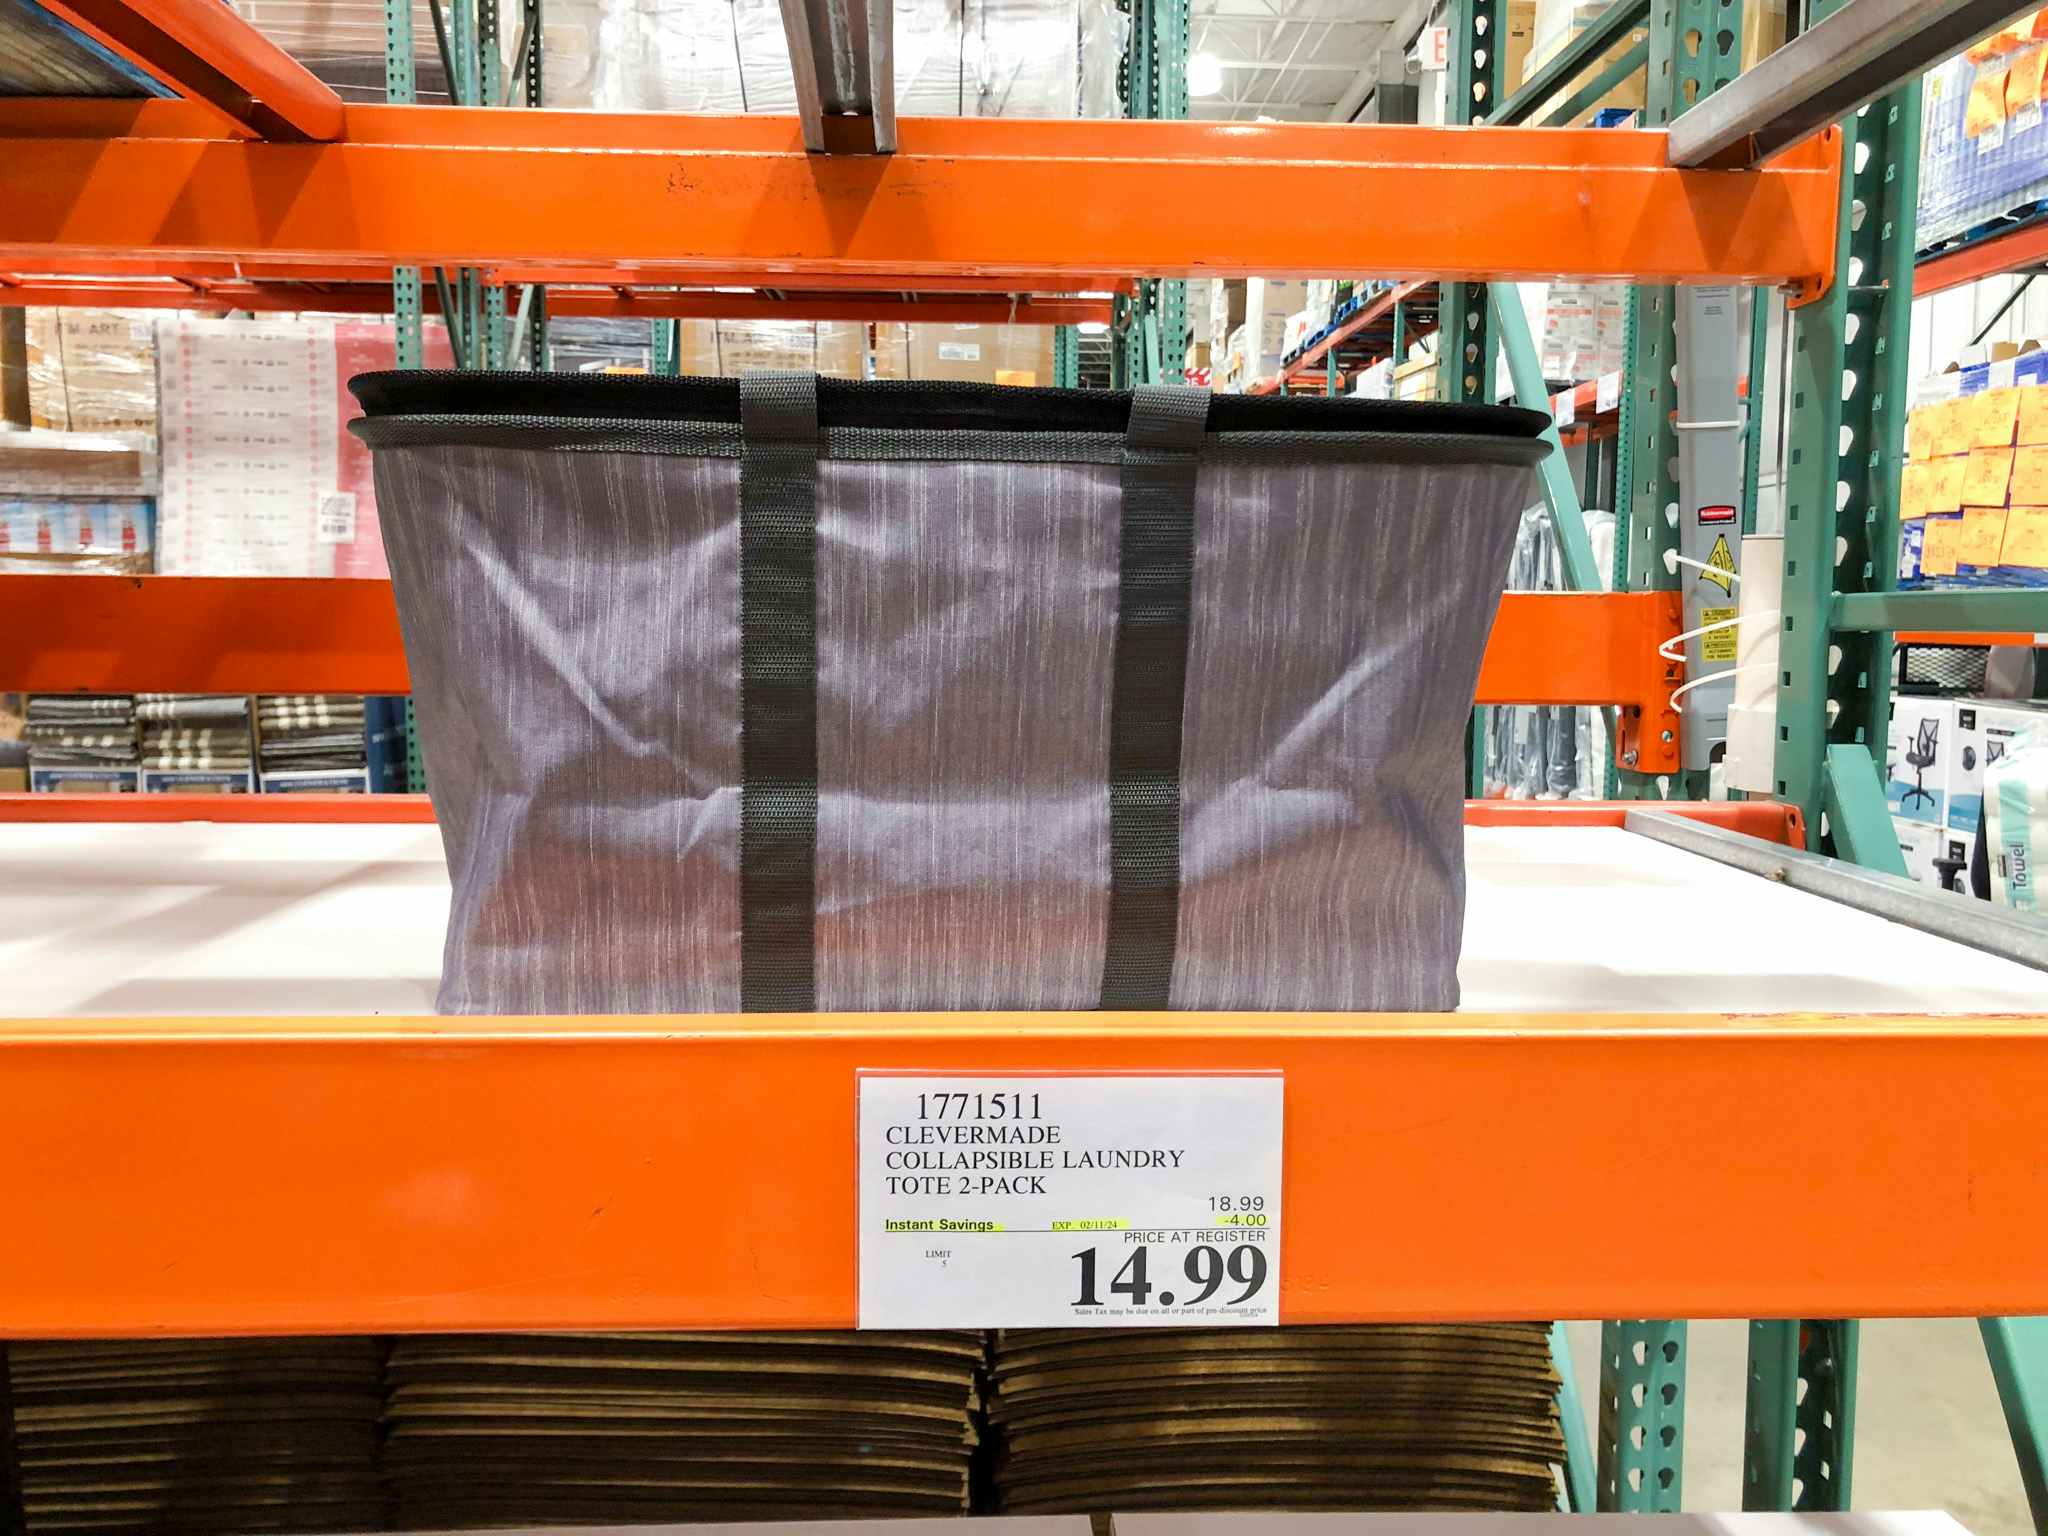 costco clevermade collapsible laundry tote